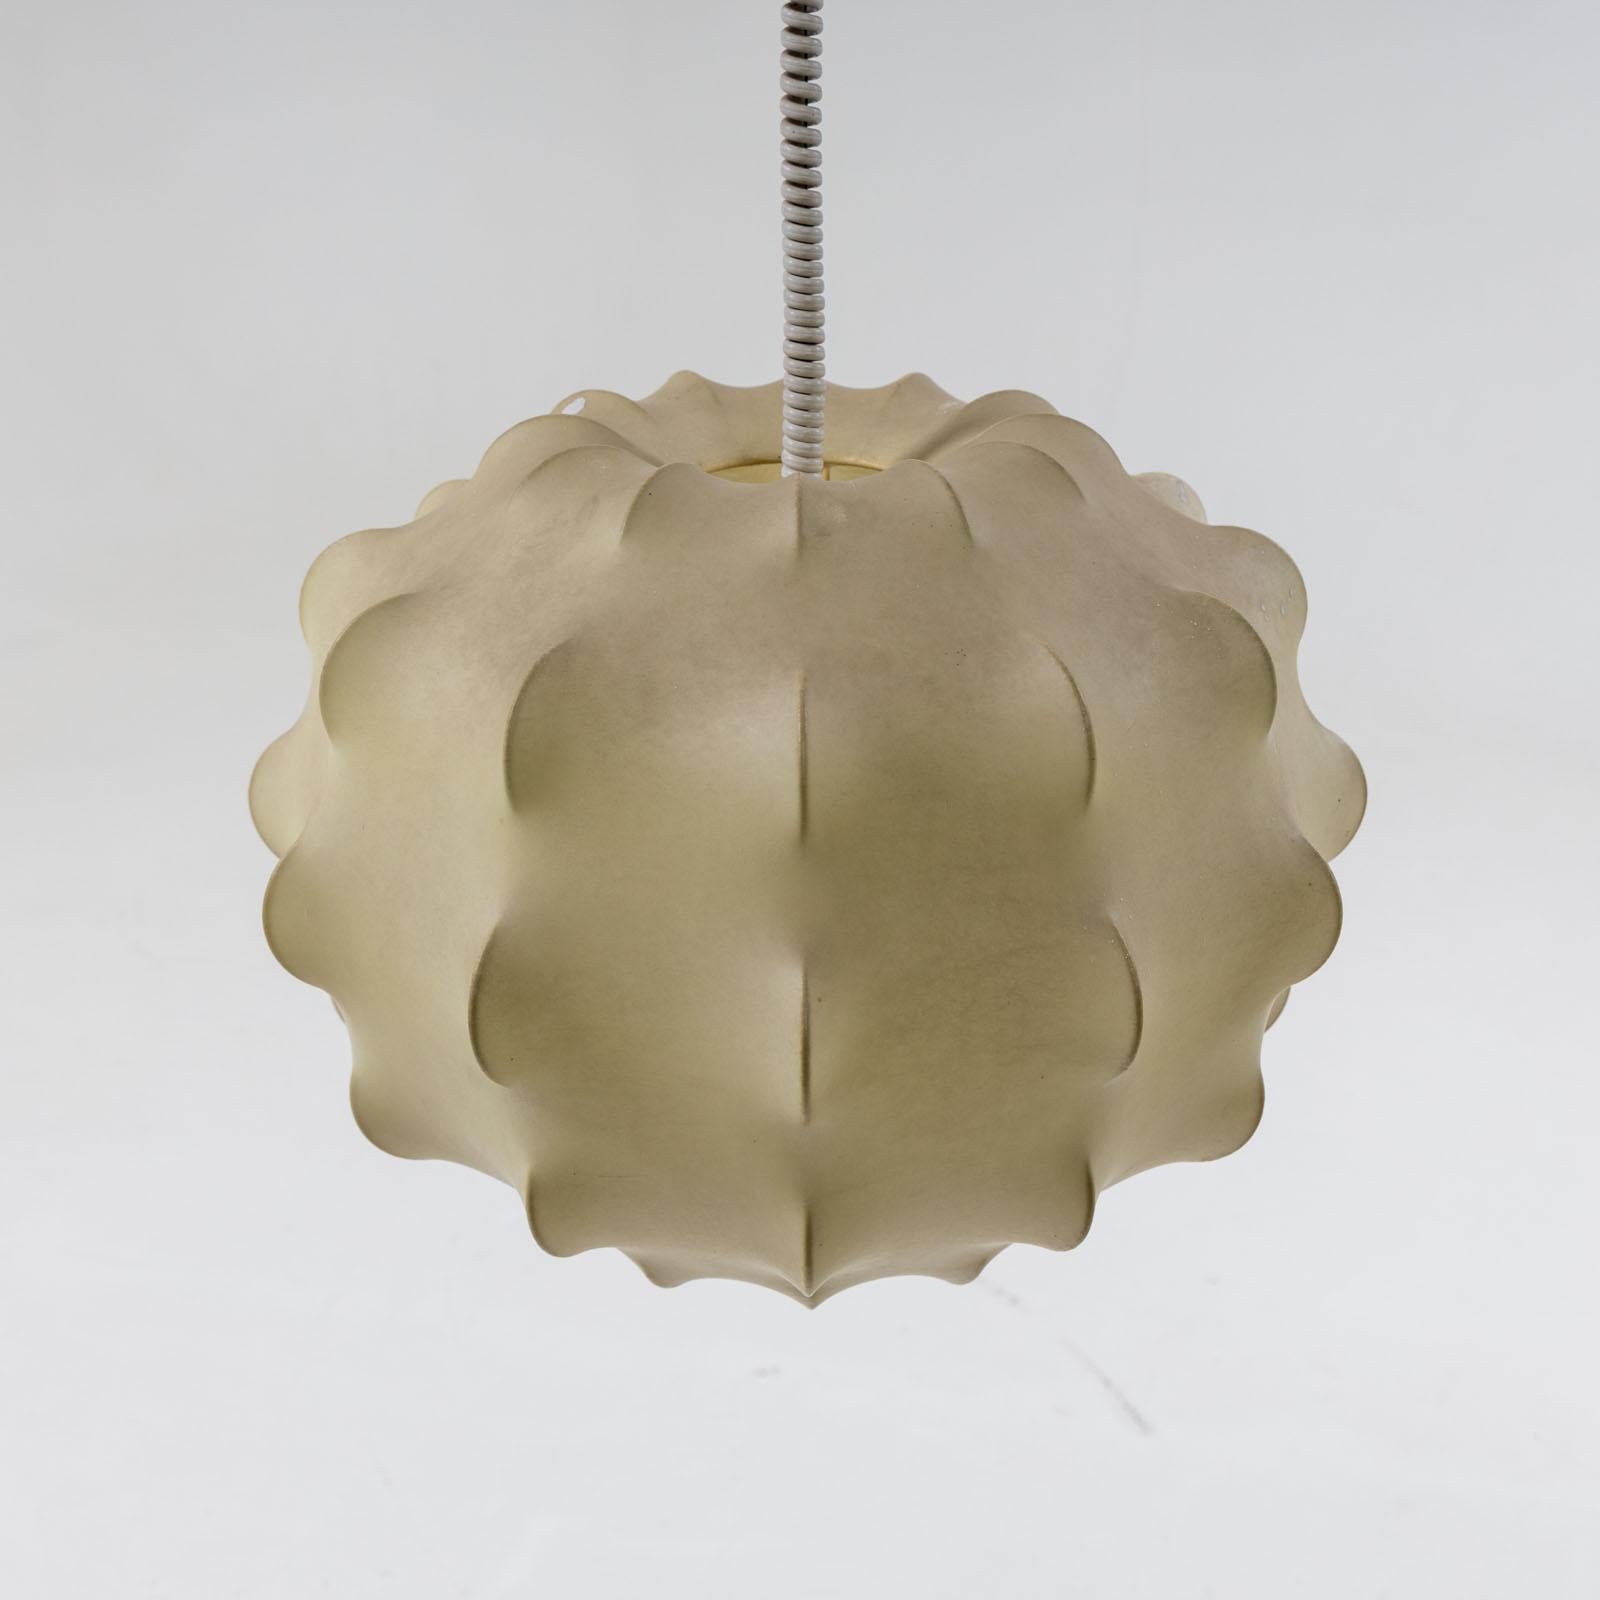 A substantial Cocoon hanging lamp in the style of Tobia Scarpa. The lamp is comprised of a curved wire frame and is enveloped in a translucent layer of resin, casting a warm and inviting glow. 